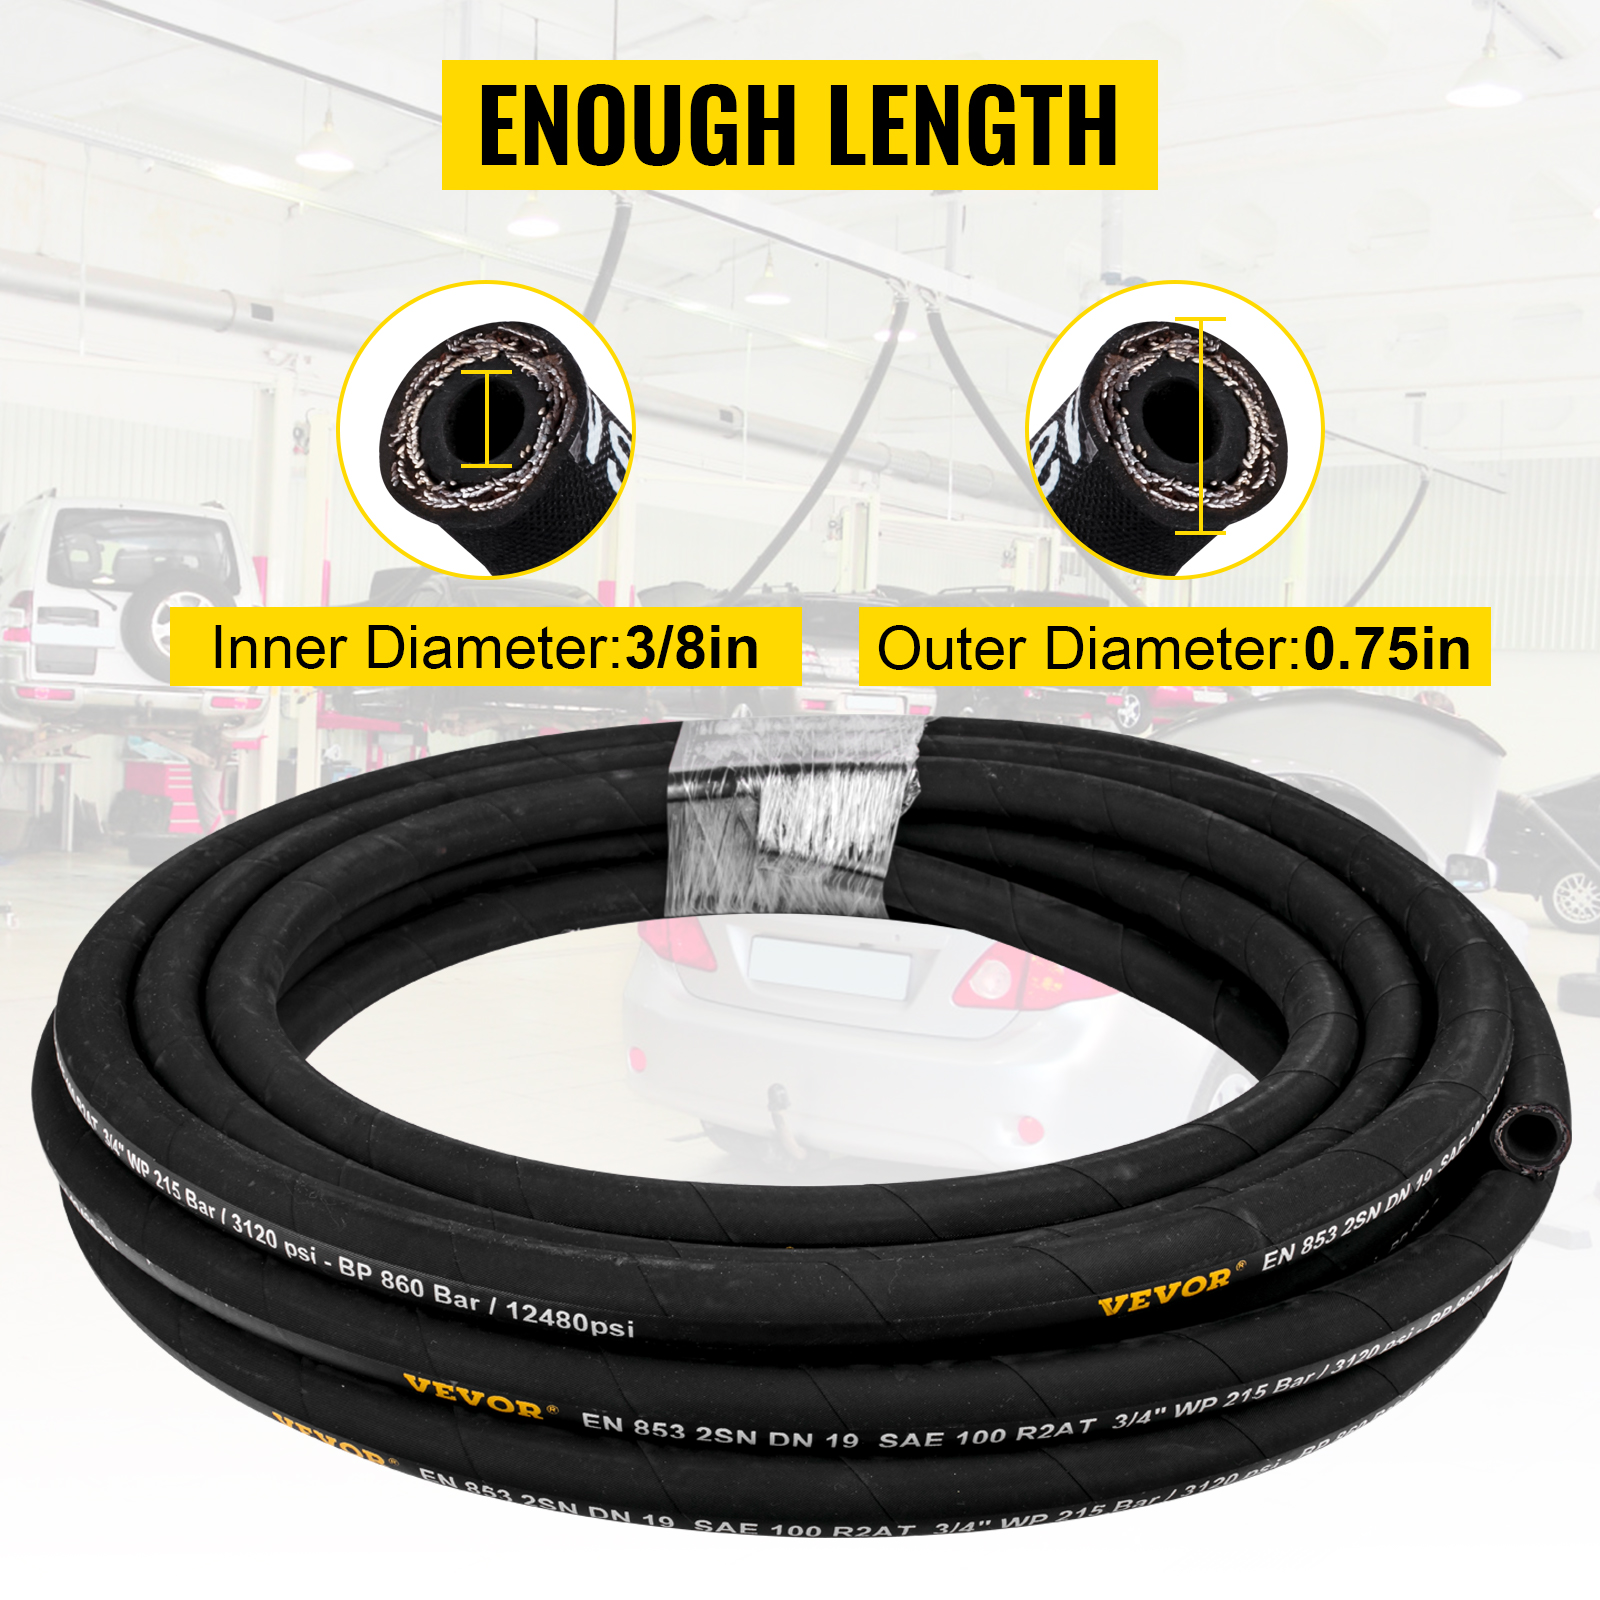 25 Ft 4800 PSI High Tensile Steel-Wire Braid Pressure Washer Hose Copper US FAST 